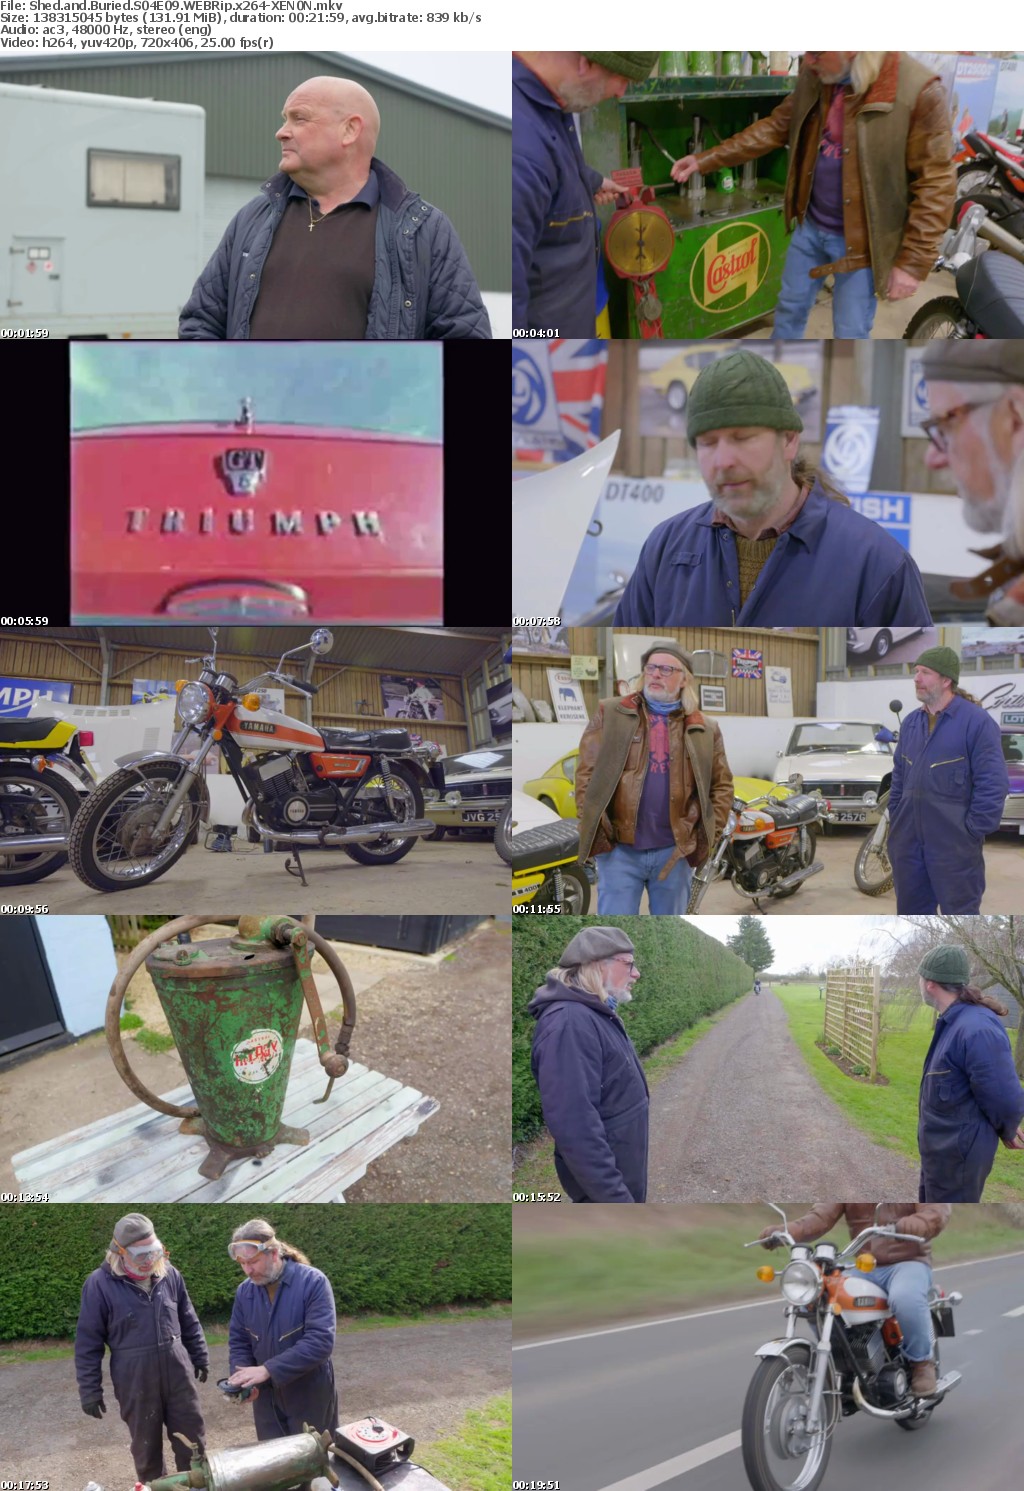 Shed and Buried S04E09 WEBRip x264-XEN0N